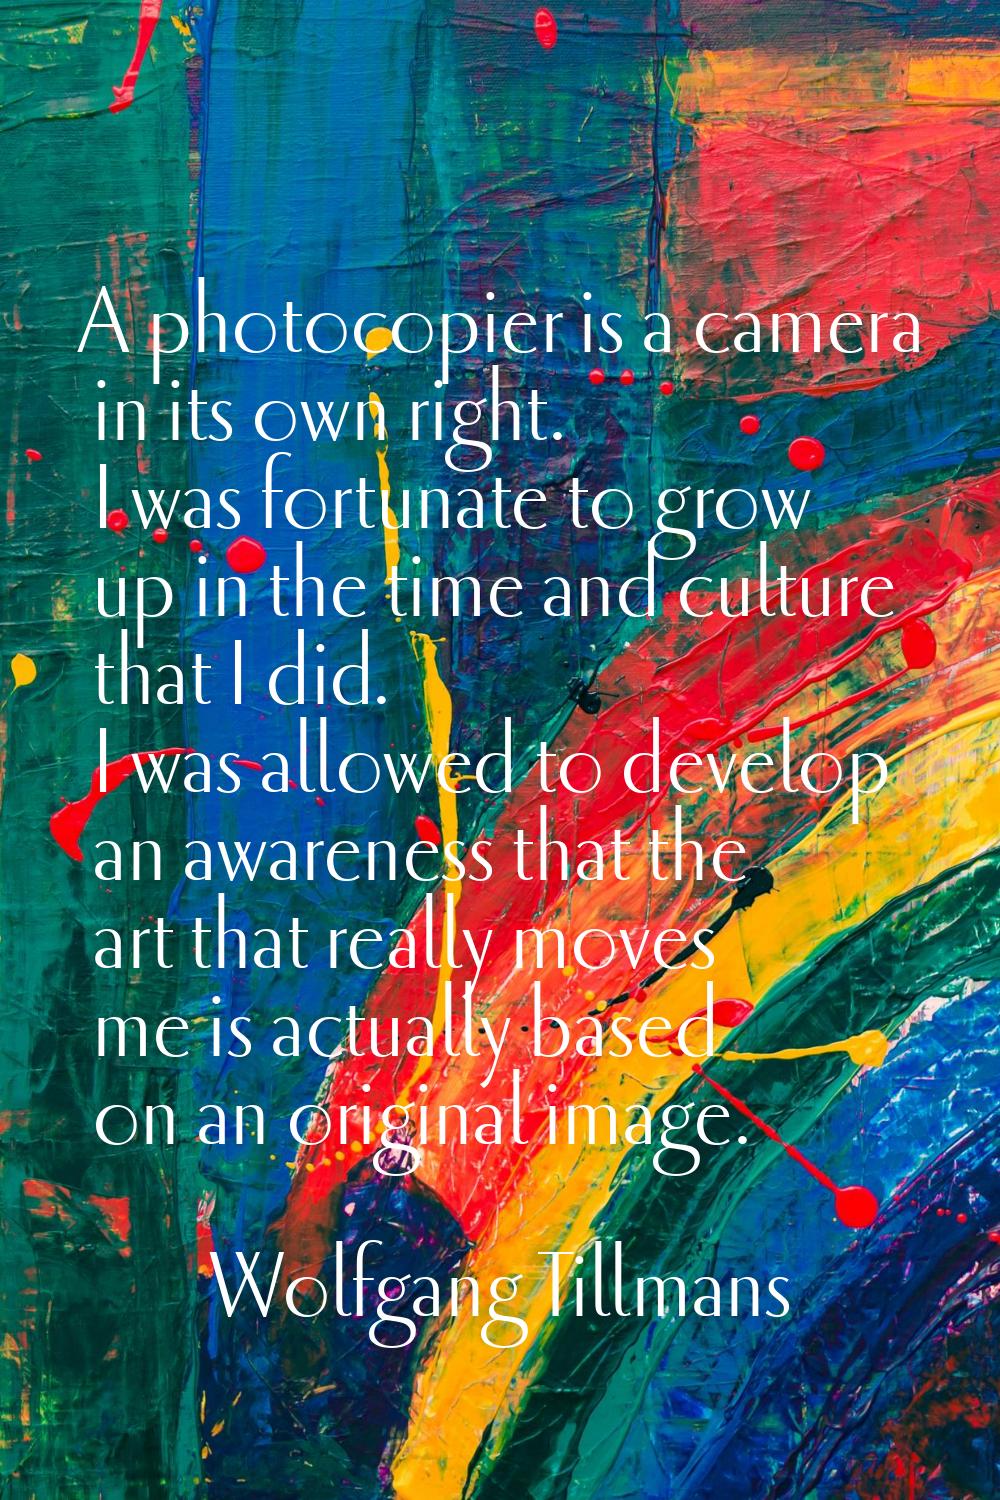 A photocopier is a camera in its own right. I was fortunate to grow up in the time and culture that